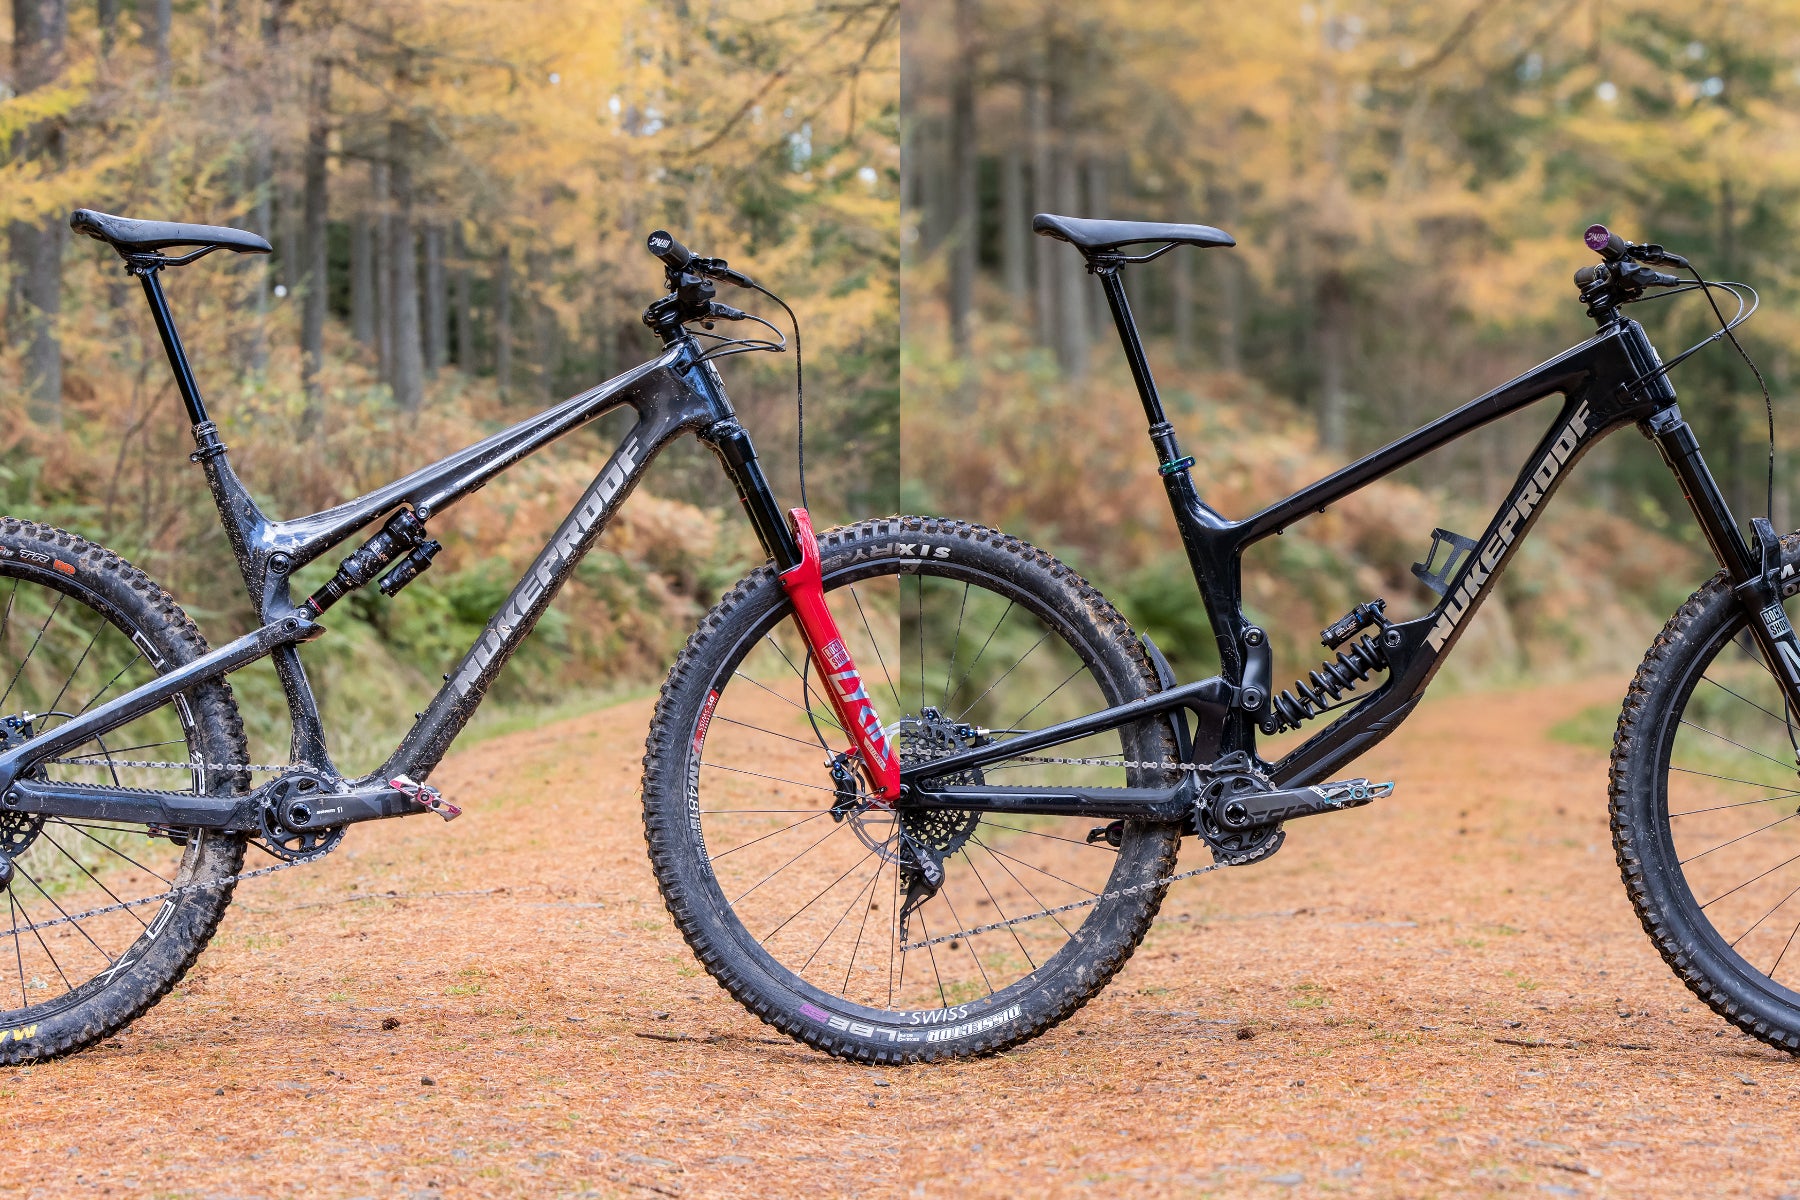 Short or Long Travel Which Is the Best All-Around Mountain Bike?